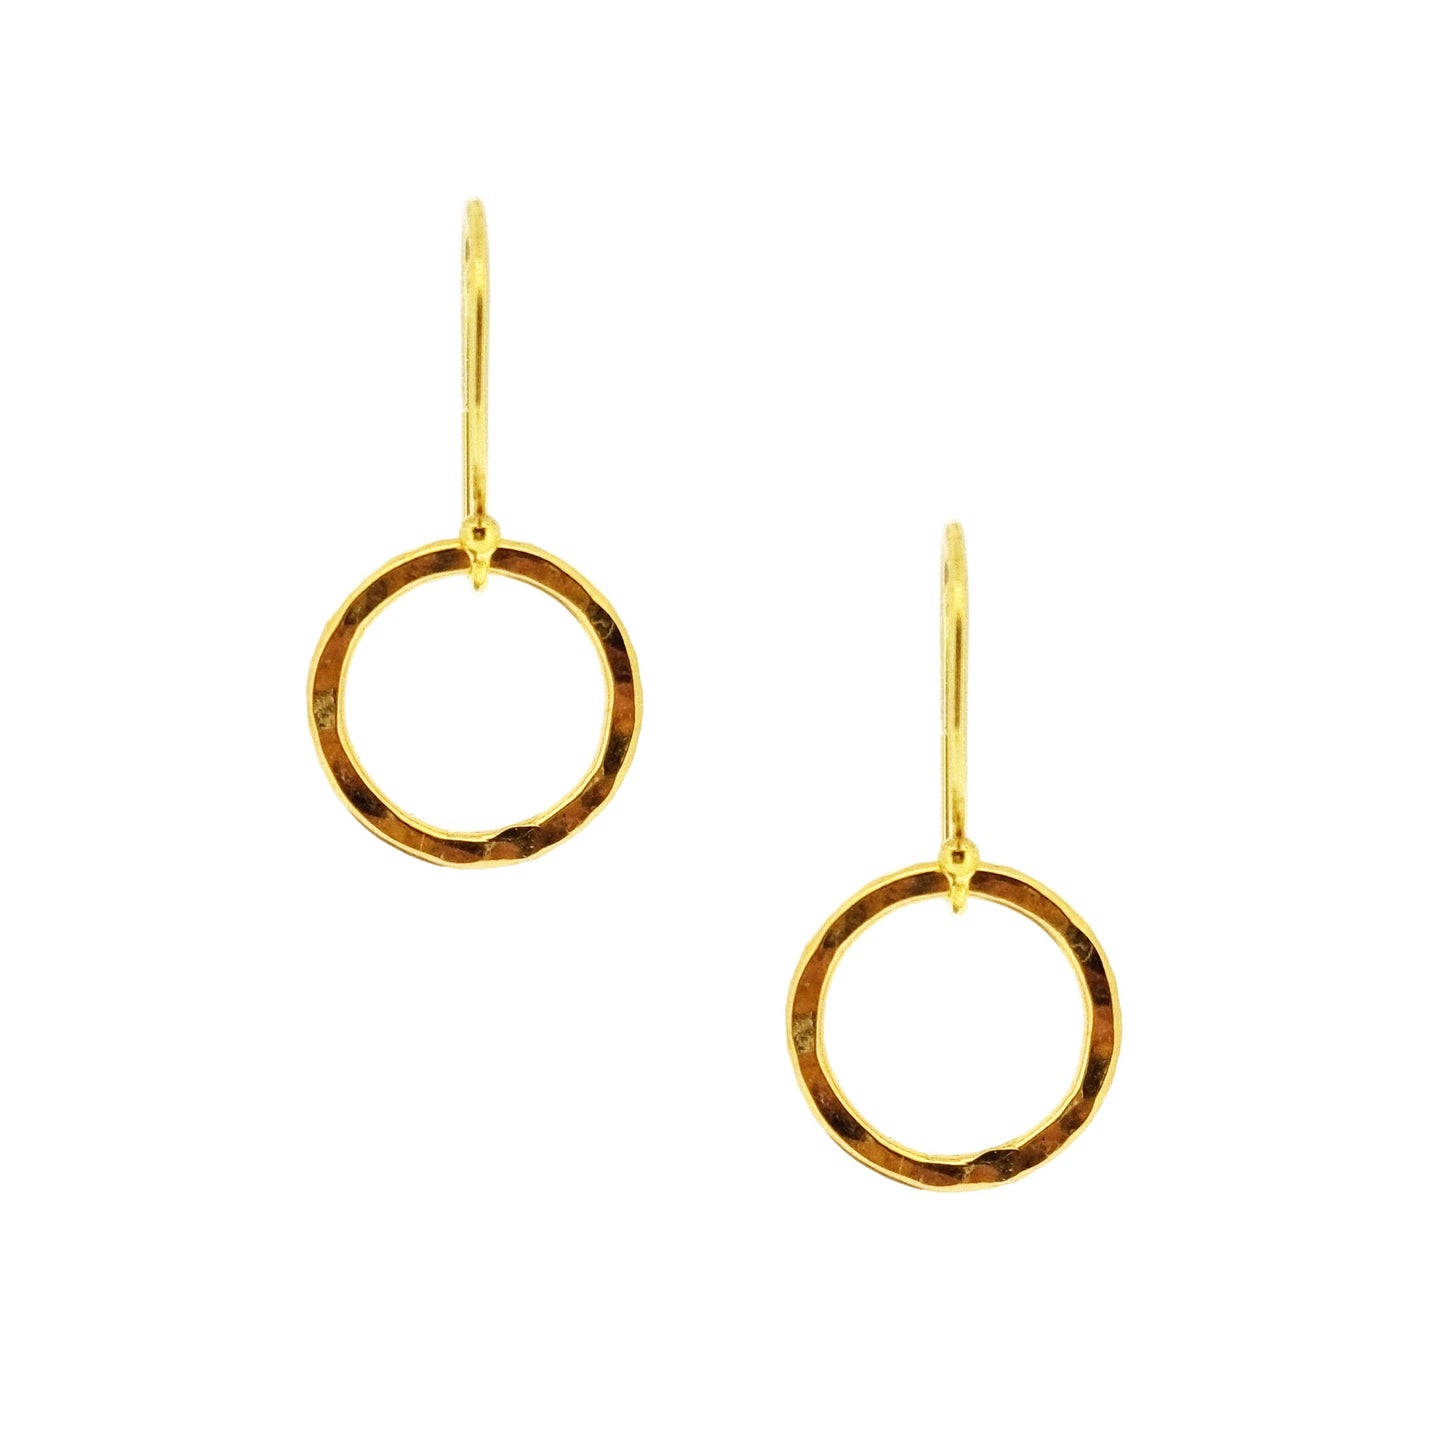 Yellow gold vermeil hammered open circle drop earrings. Small